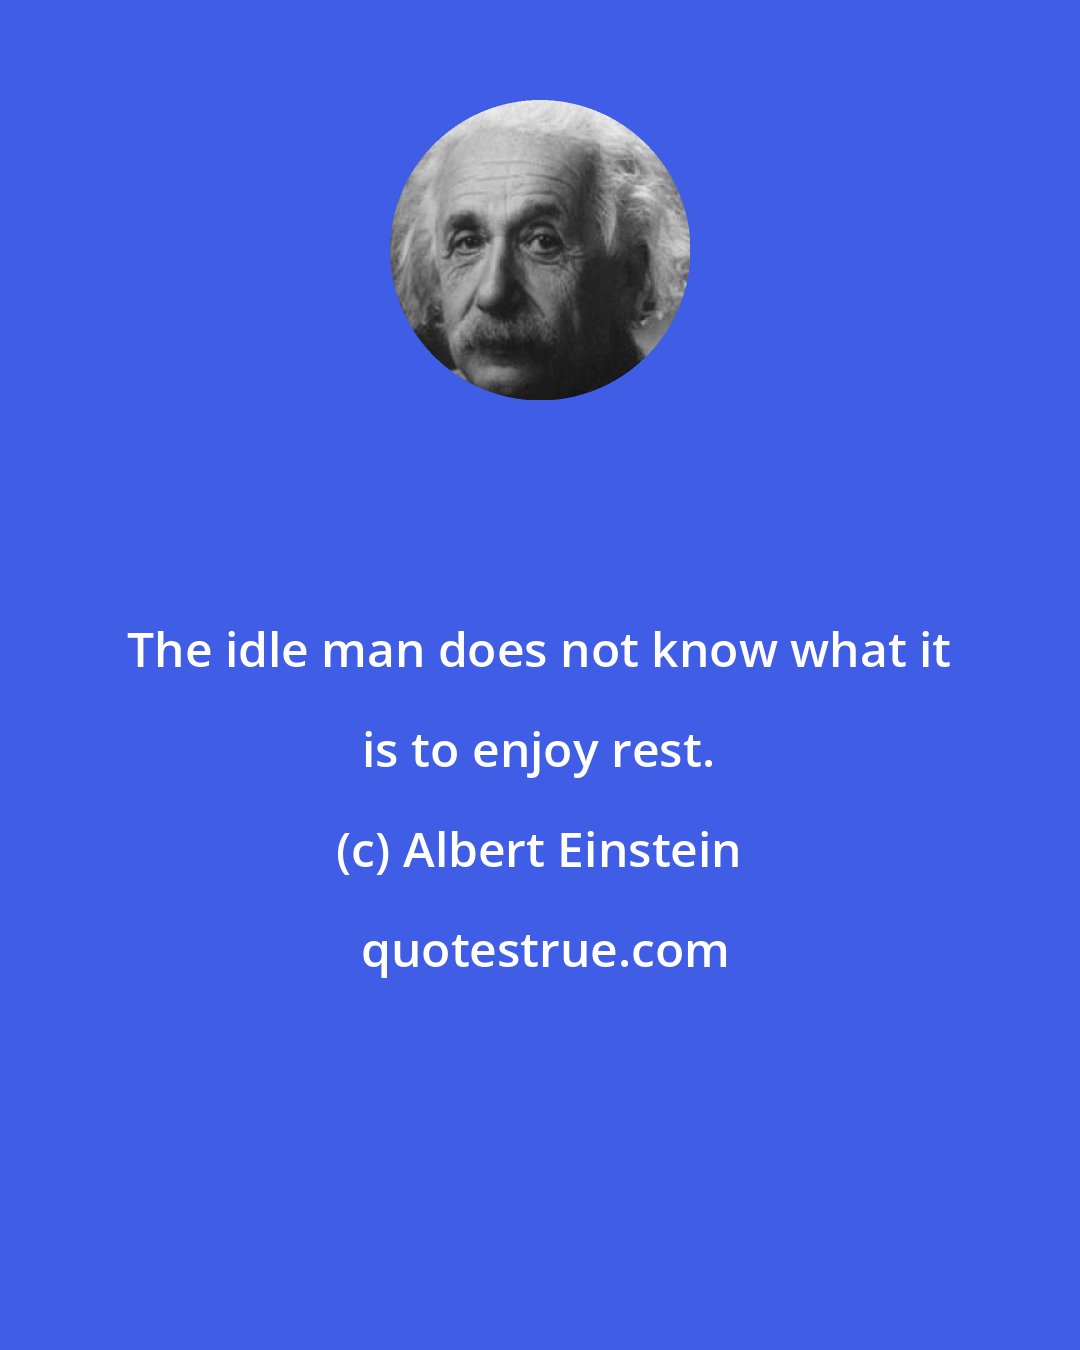 Albert Einstein: The idle man does not know what it is to enjoy rest.